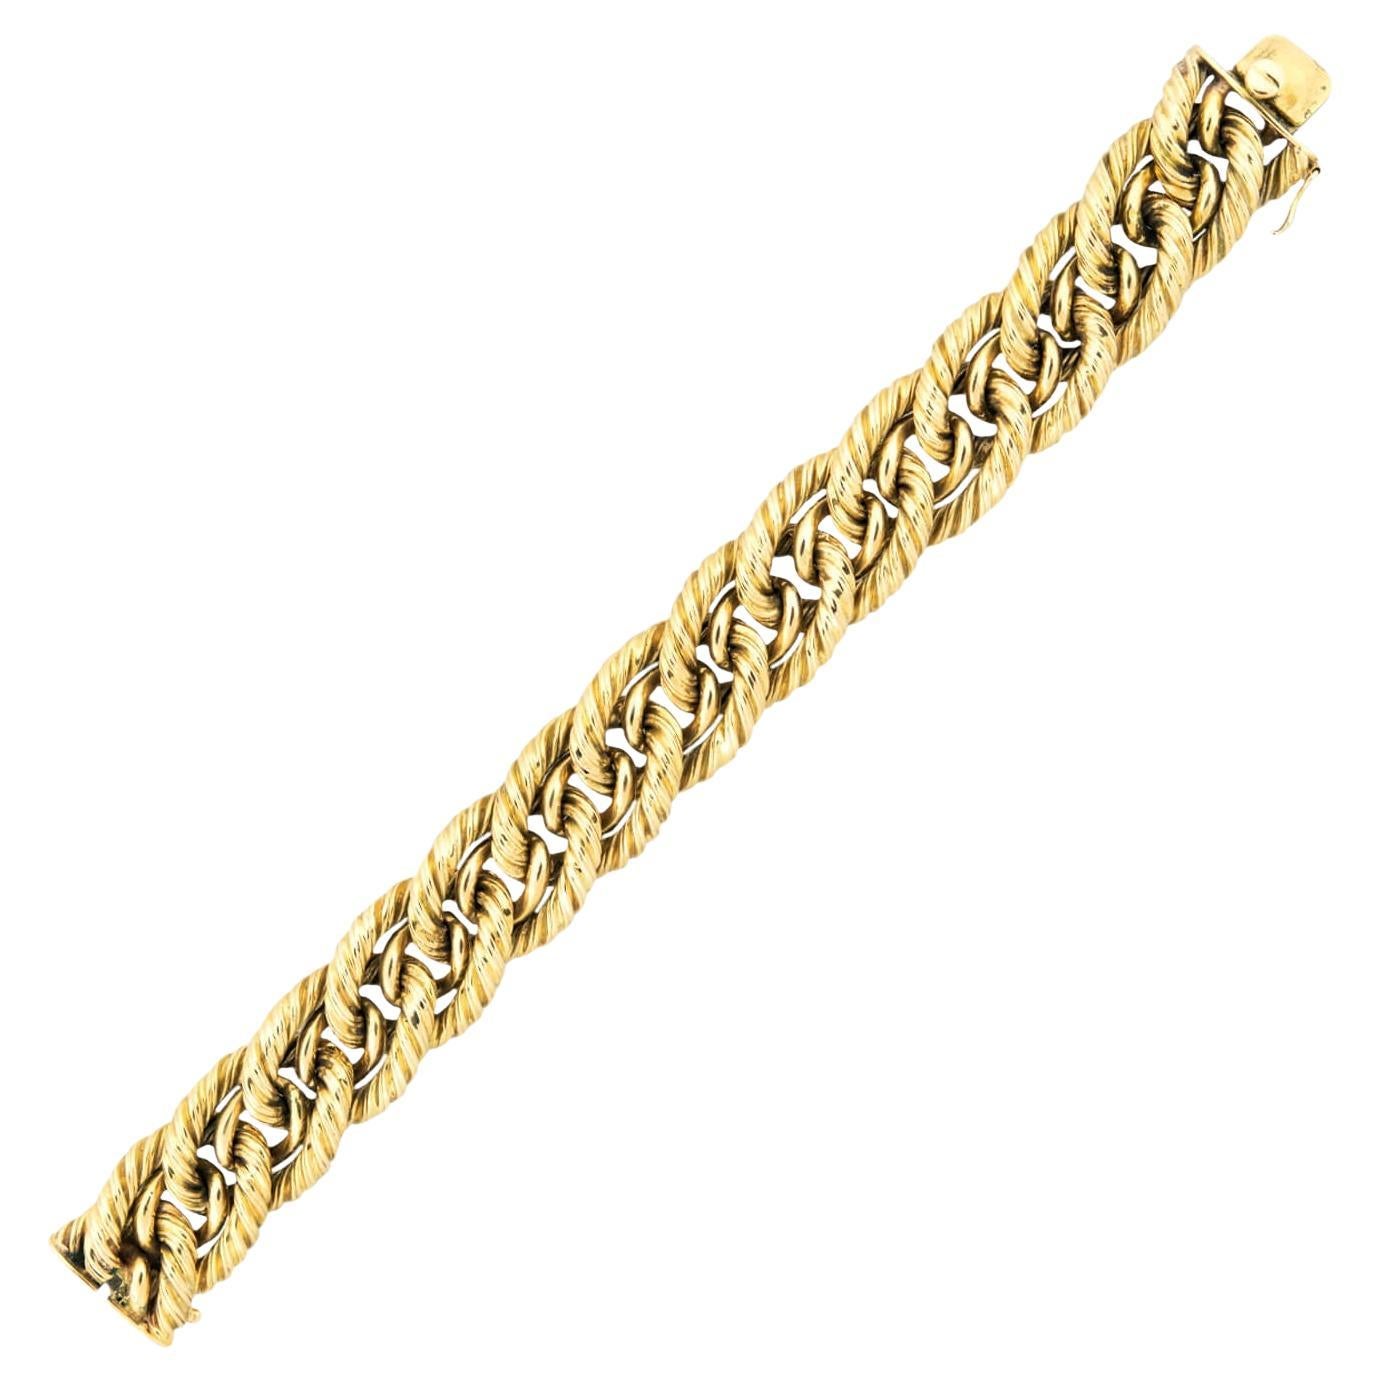 TIFFANY & CO. Vintage 18k Gold Twisted Curb Chain Bracelet 57.0dwt For Sale